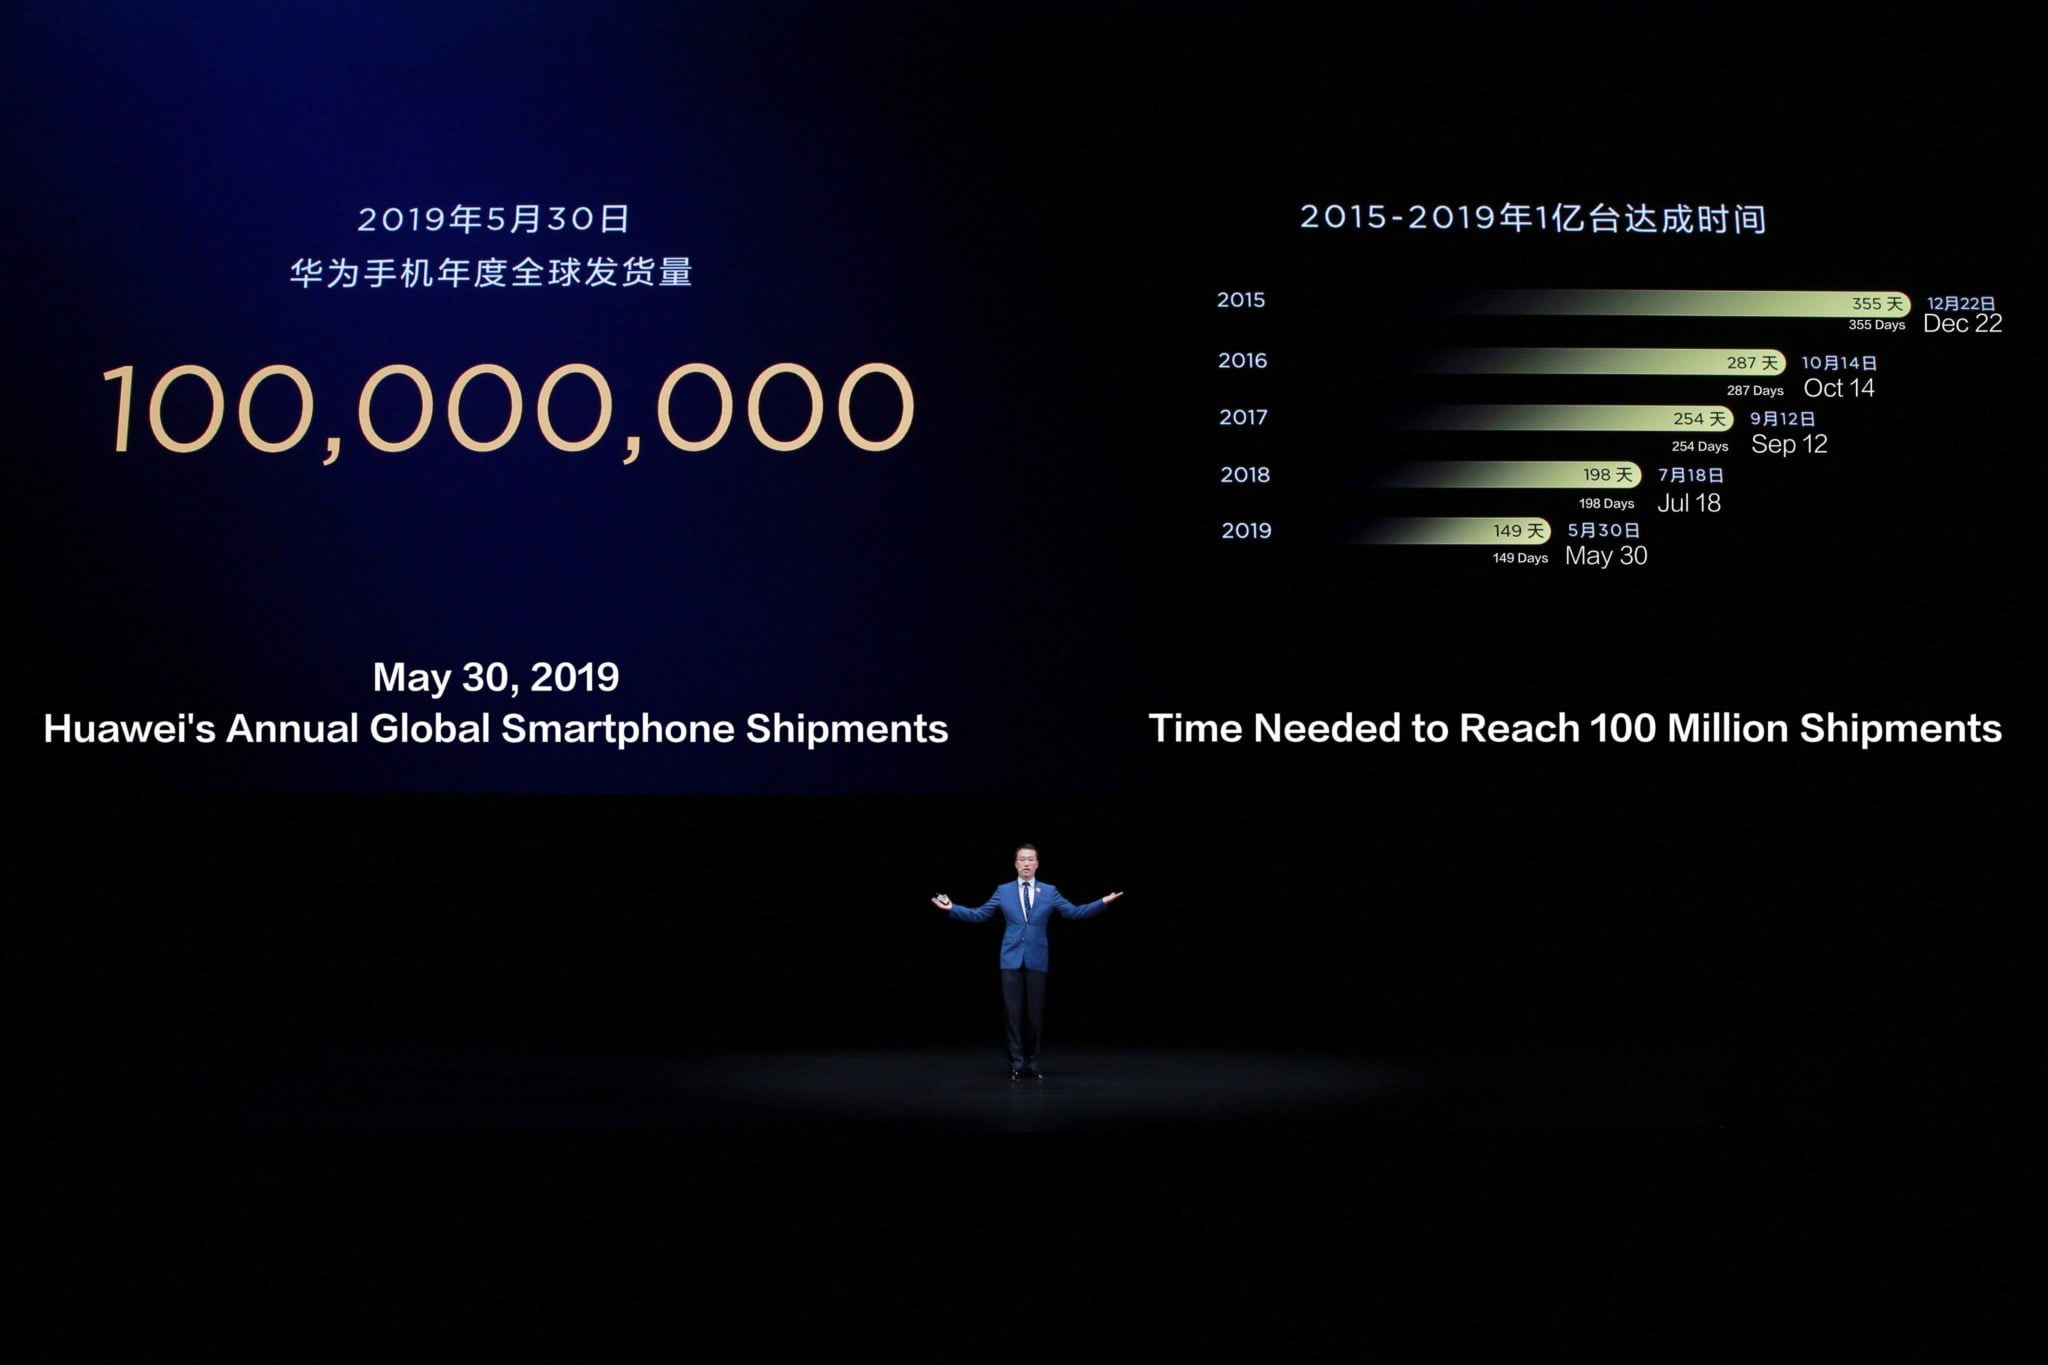 Huawei Has Shipped 100 Million Smartphones by 30 May